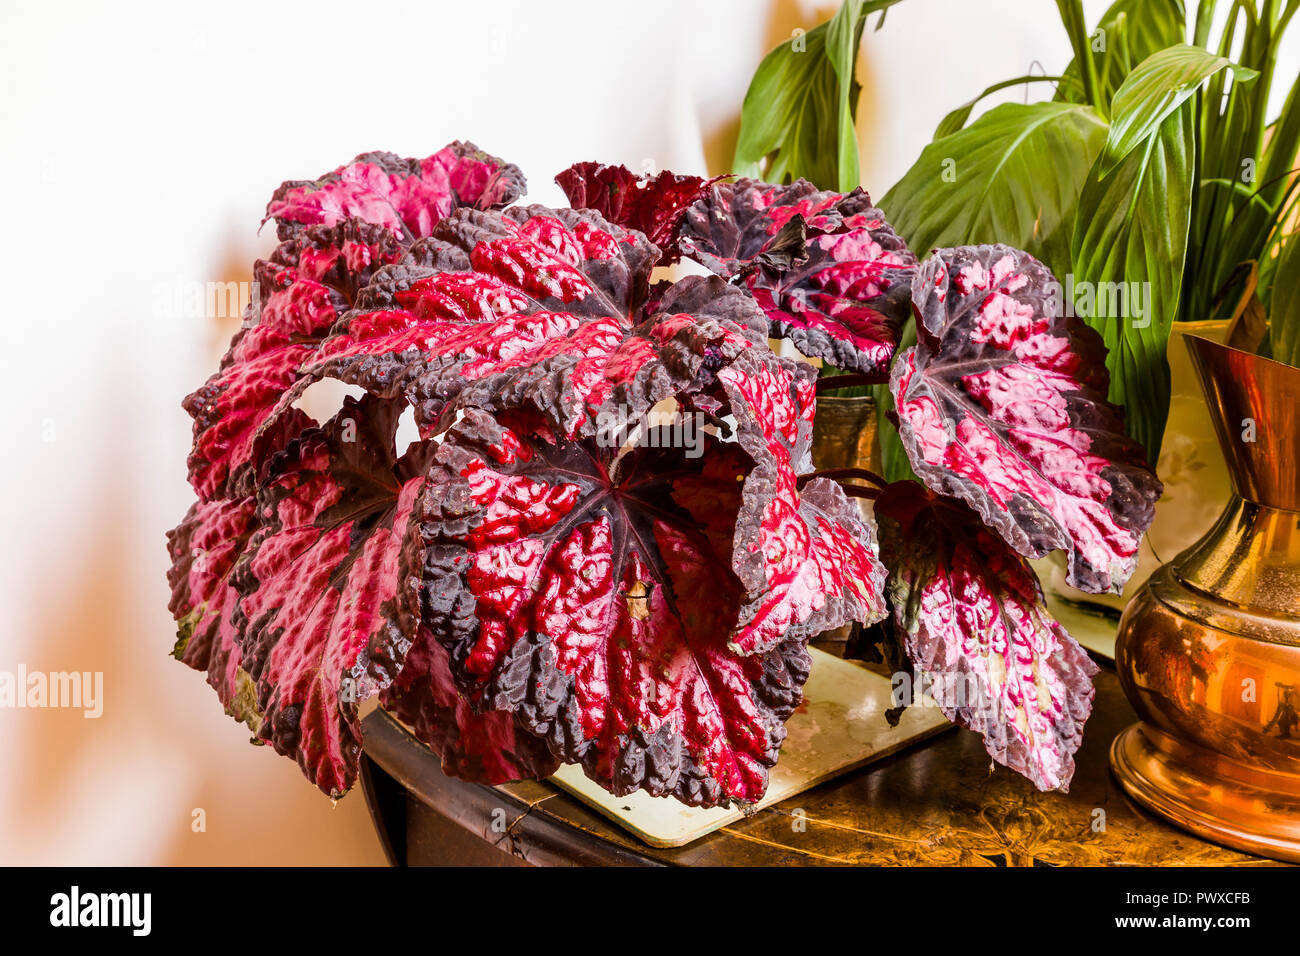 Indoor house plants including Begonia rex Vesuvius showing deeply wrinkled brightly coloured leaves Stock Photo